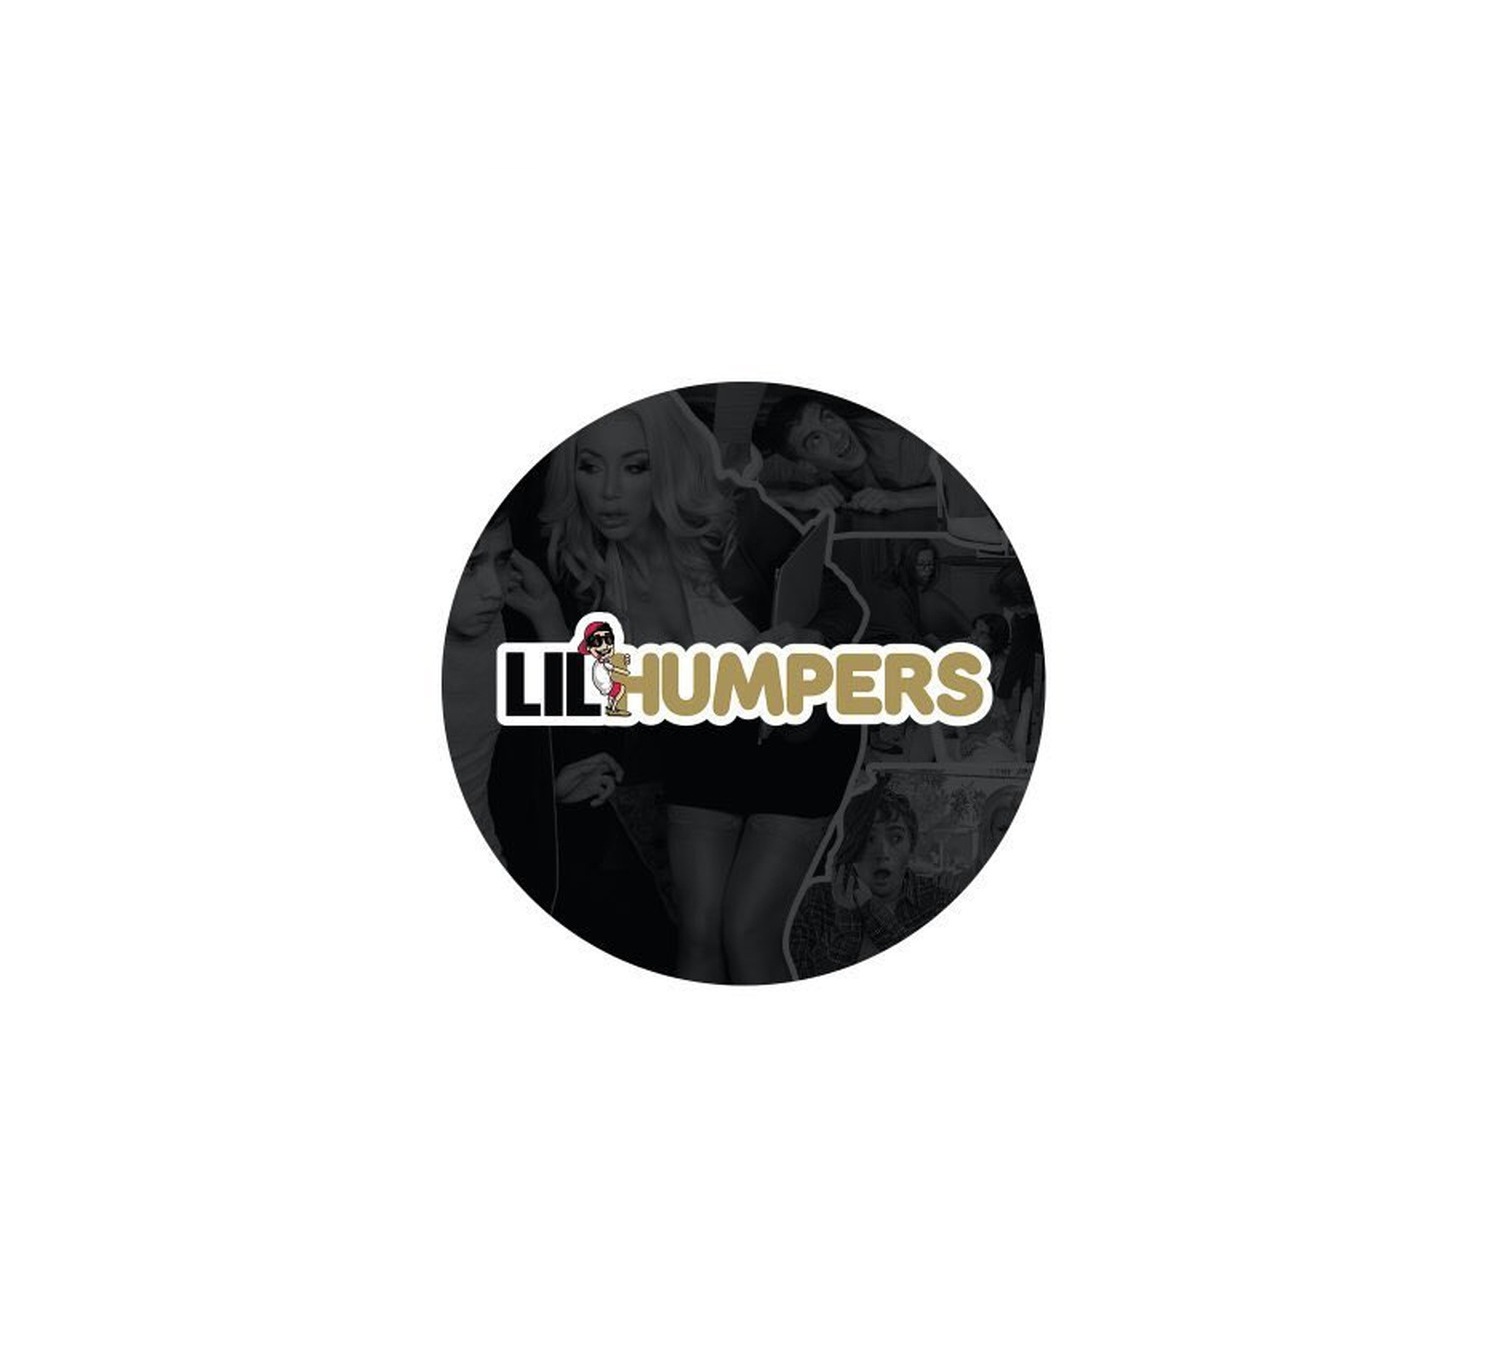 Lilhumpers account / 6 Mounths Fast Delivery